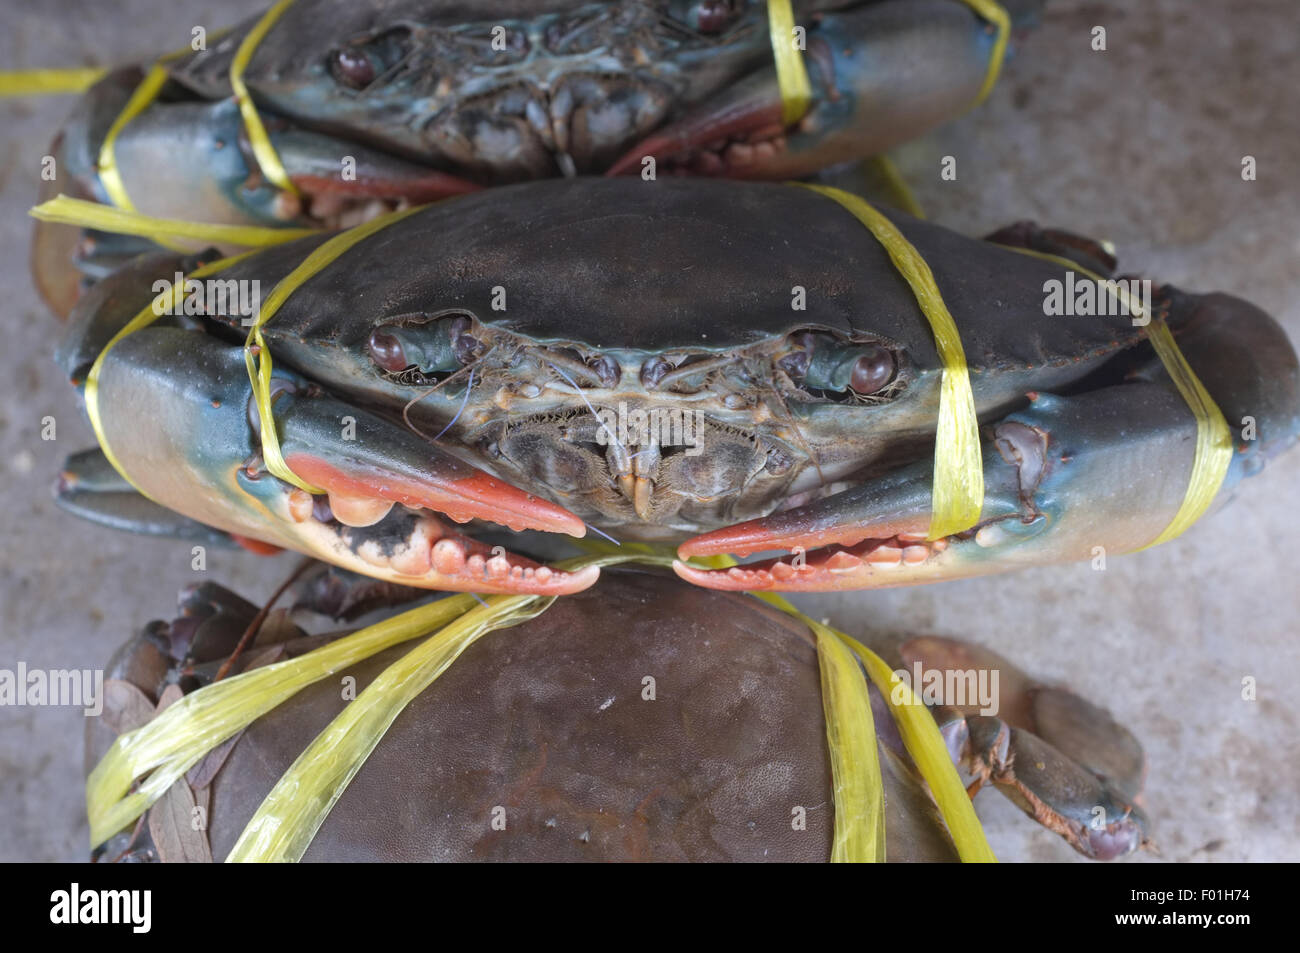 Sea crab tied with rope Stock Photo - Alamy